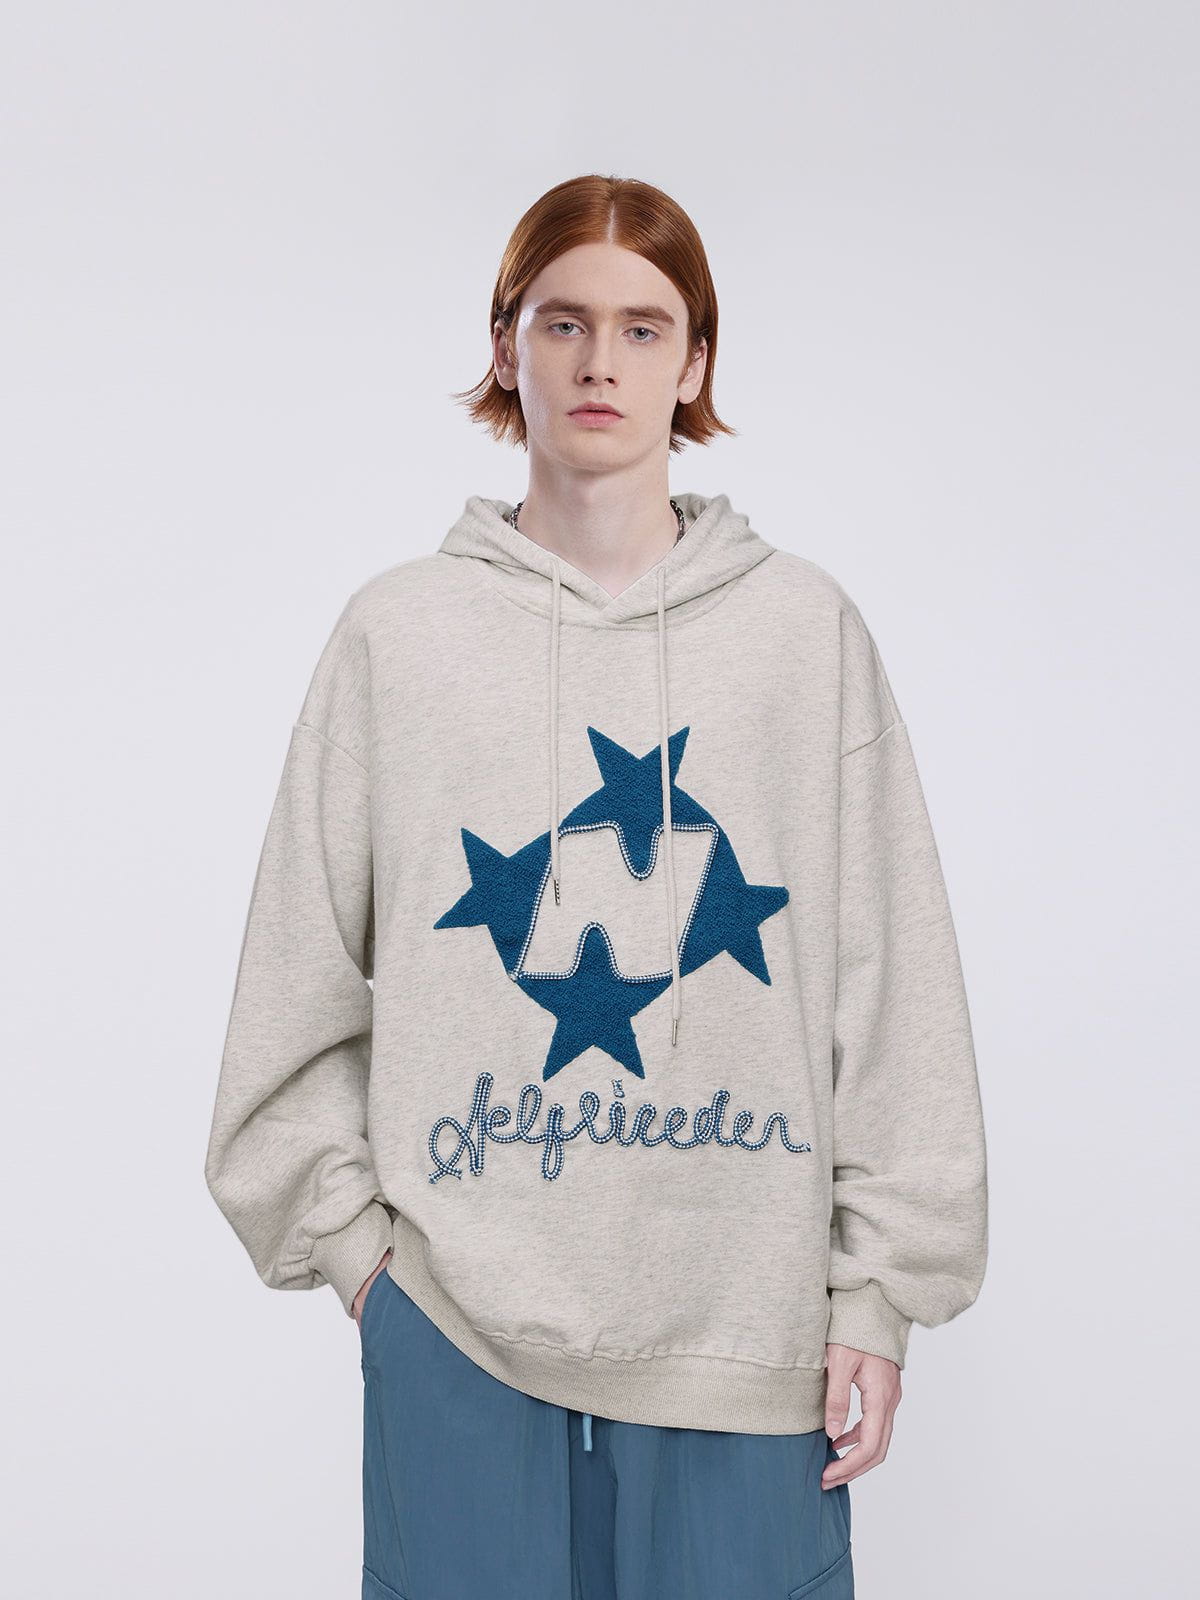 Aelfric Eden Stellaris Embroidered Hoodie [Recommended by @angeliabistrong ]